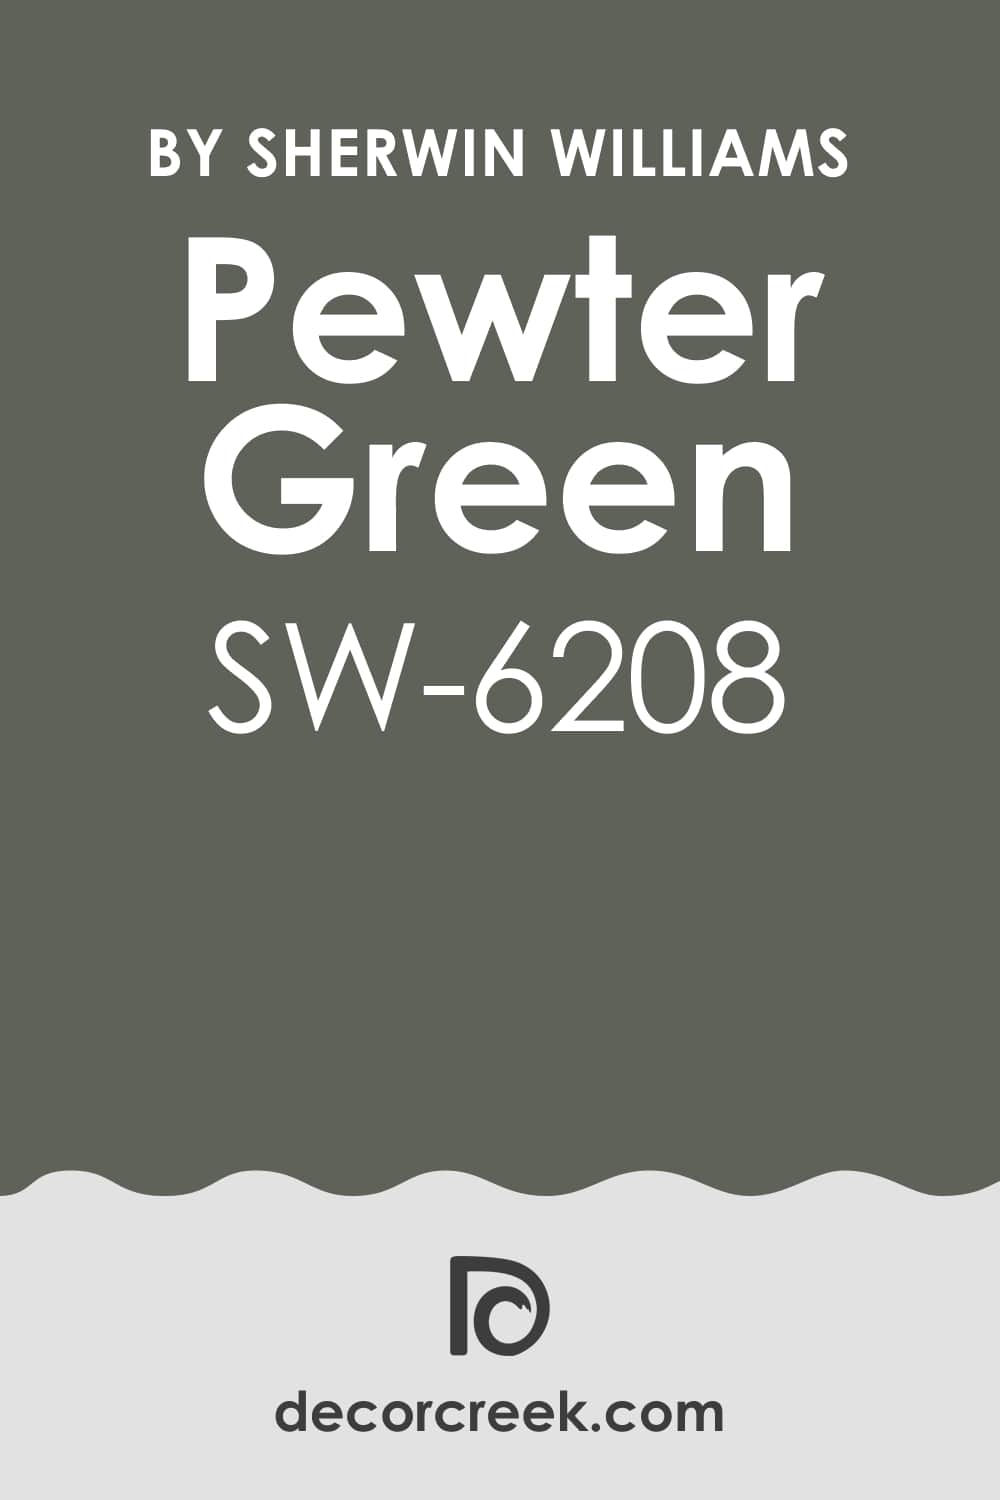 What Kind Of Color Is Pewter Green SW-6208?